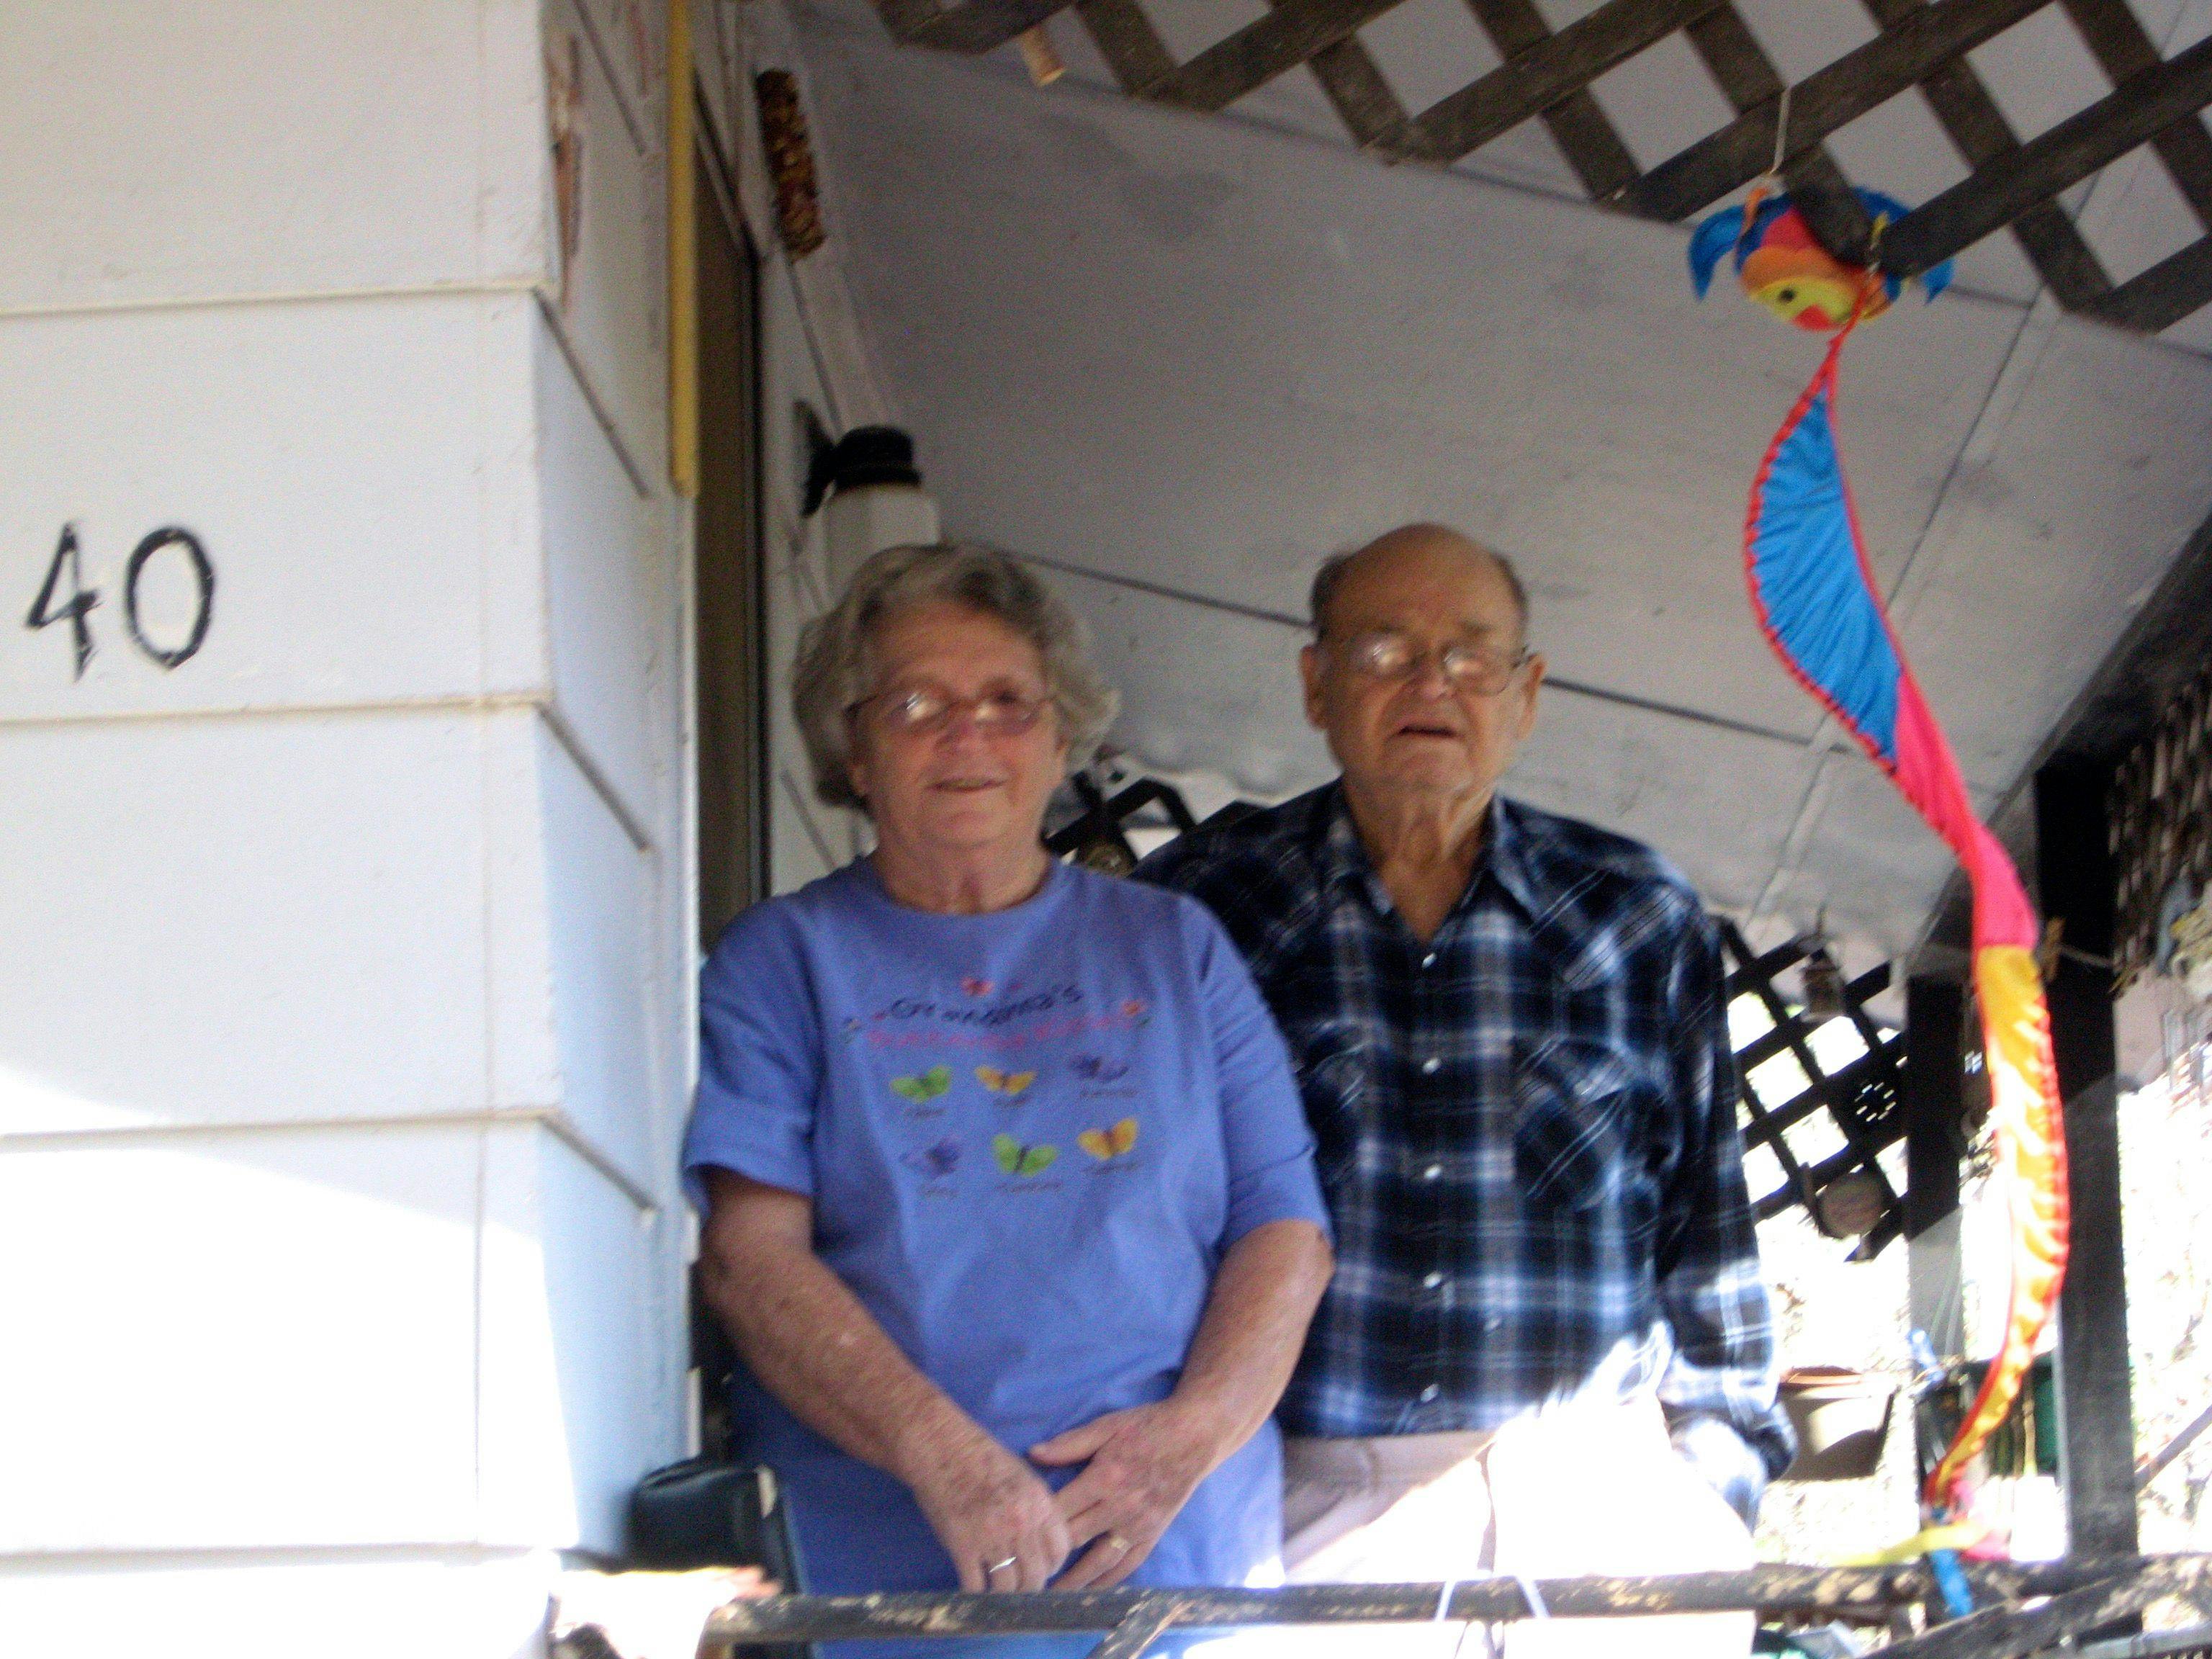 Casey's grandparents standing together on the porch of the house his grandpa.